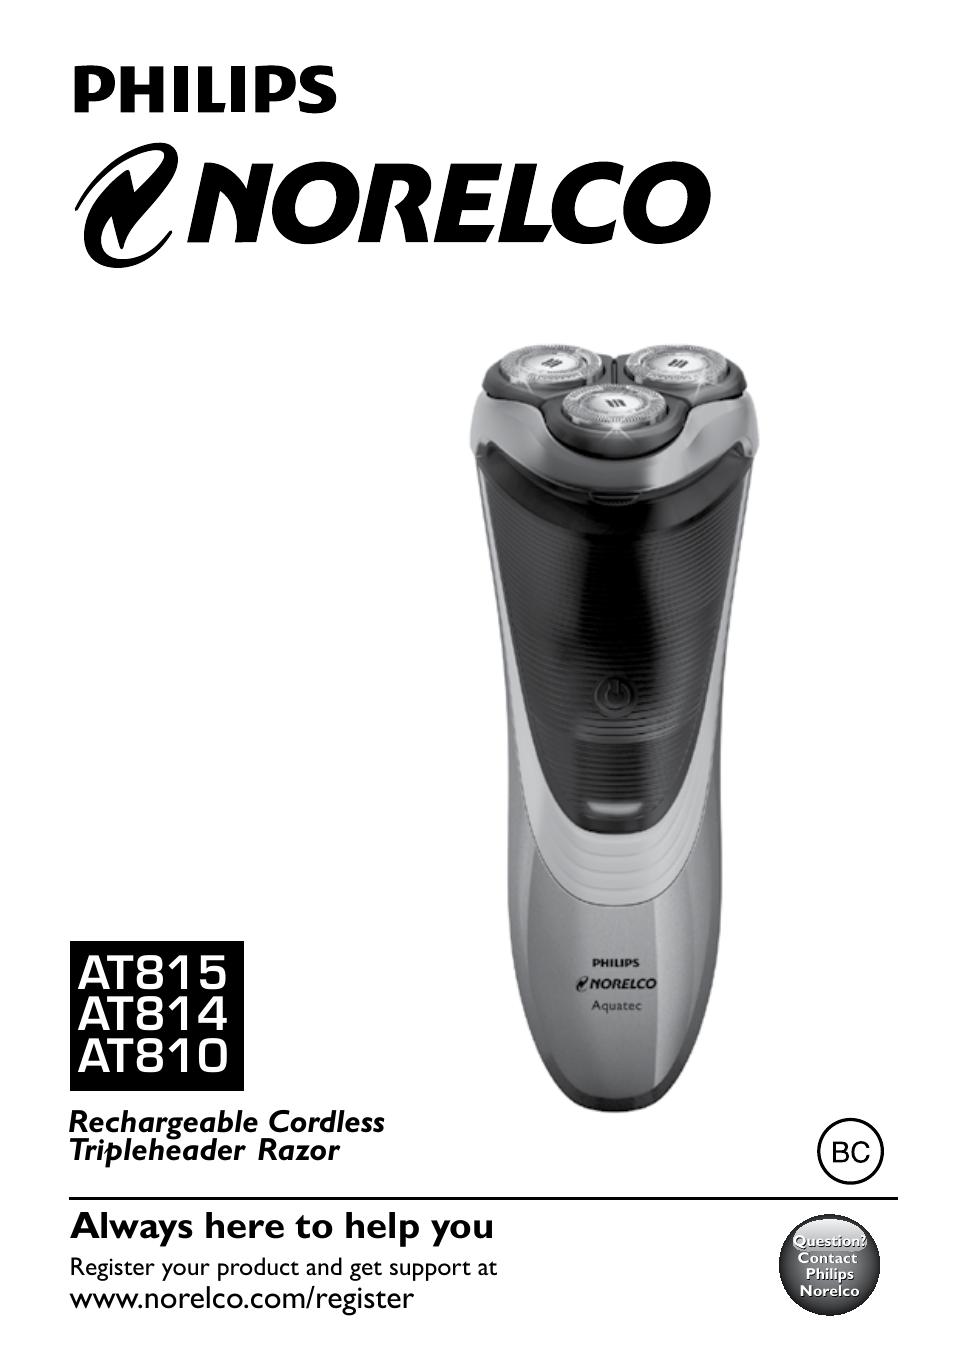 Philips Norelco Shaver 4100 Series 4000 wet & dry electric shaver AT810-41  DualPrecision heads Flex & Float system 50 min shaving 1 hour charge  AquaTech wet & dry technology with Aquatec -